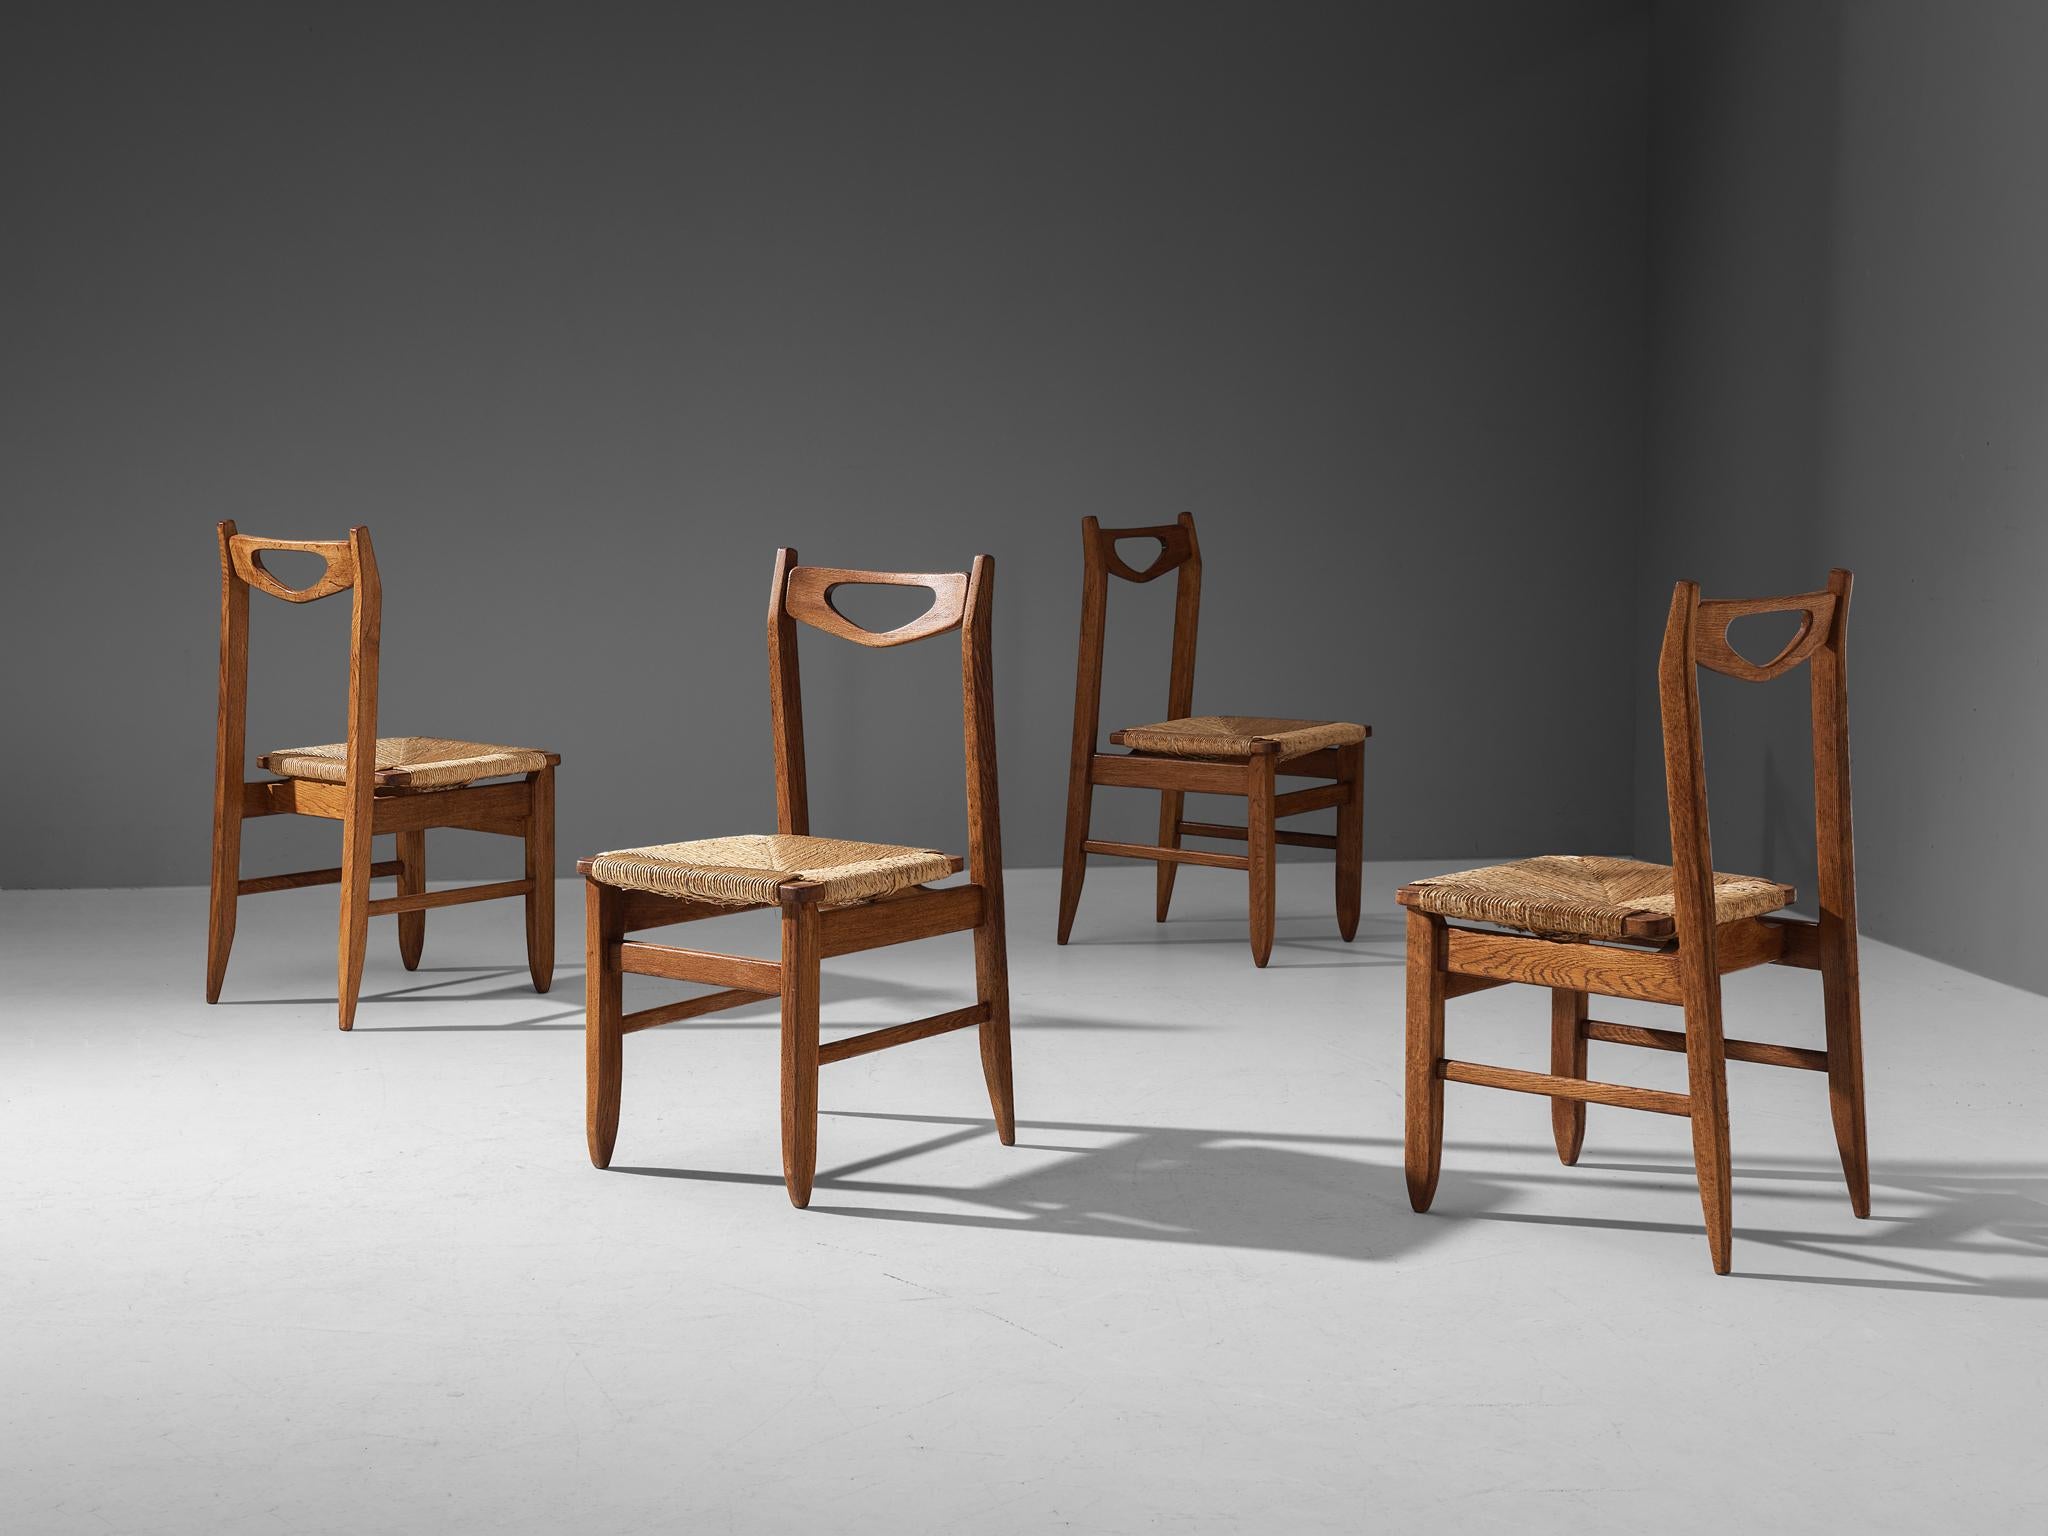 Guillerme & Chambron for Votre Maison, dining chairs, oak, straw, France, 1960s

Set of four elegant dining chairs in solid oak by Guillerme and Chambron. These chairs show the characteristic frame of this French designer duo. The backrest